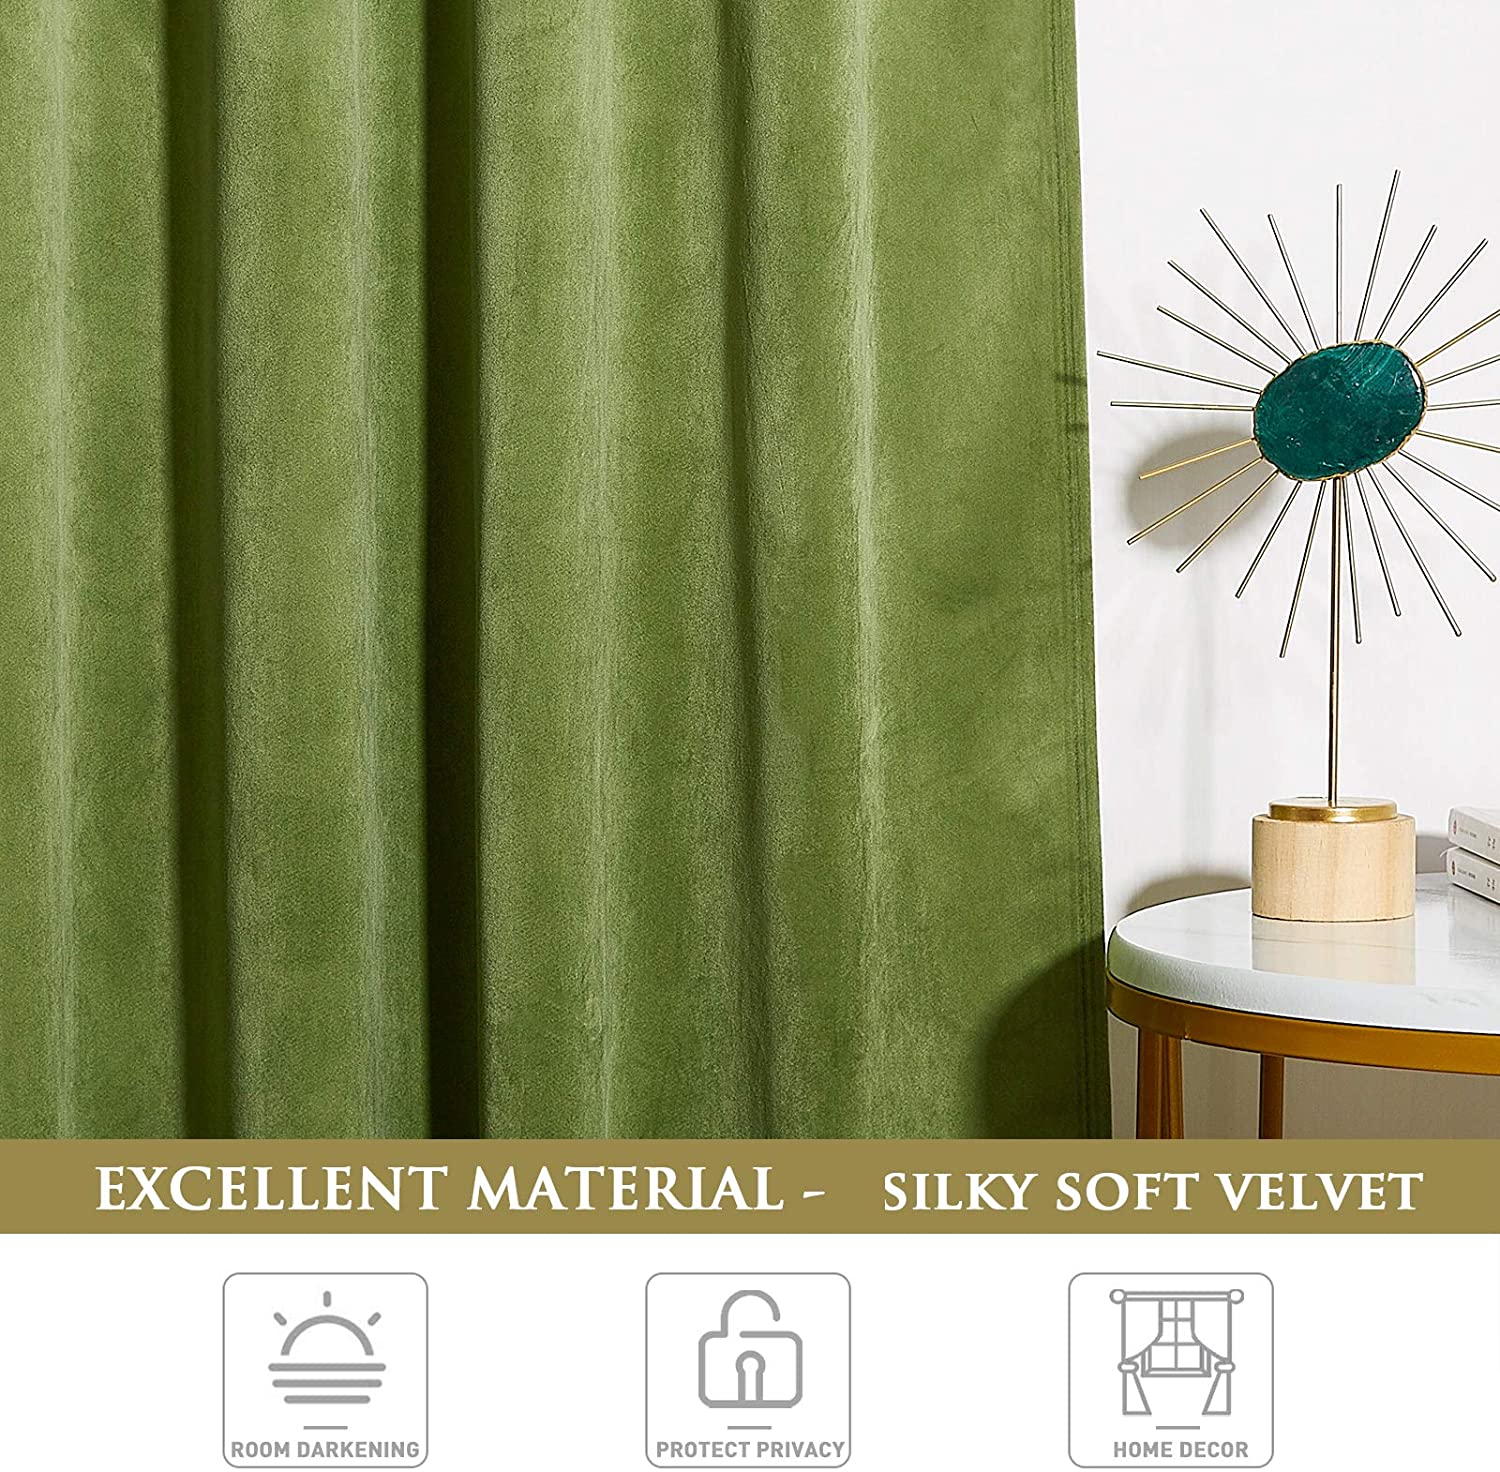 Custom Christmas Velvet Curtains Privacy Curtains Rod Pocket Thermal Curtain 2 Panels KGORGE Store